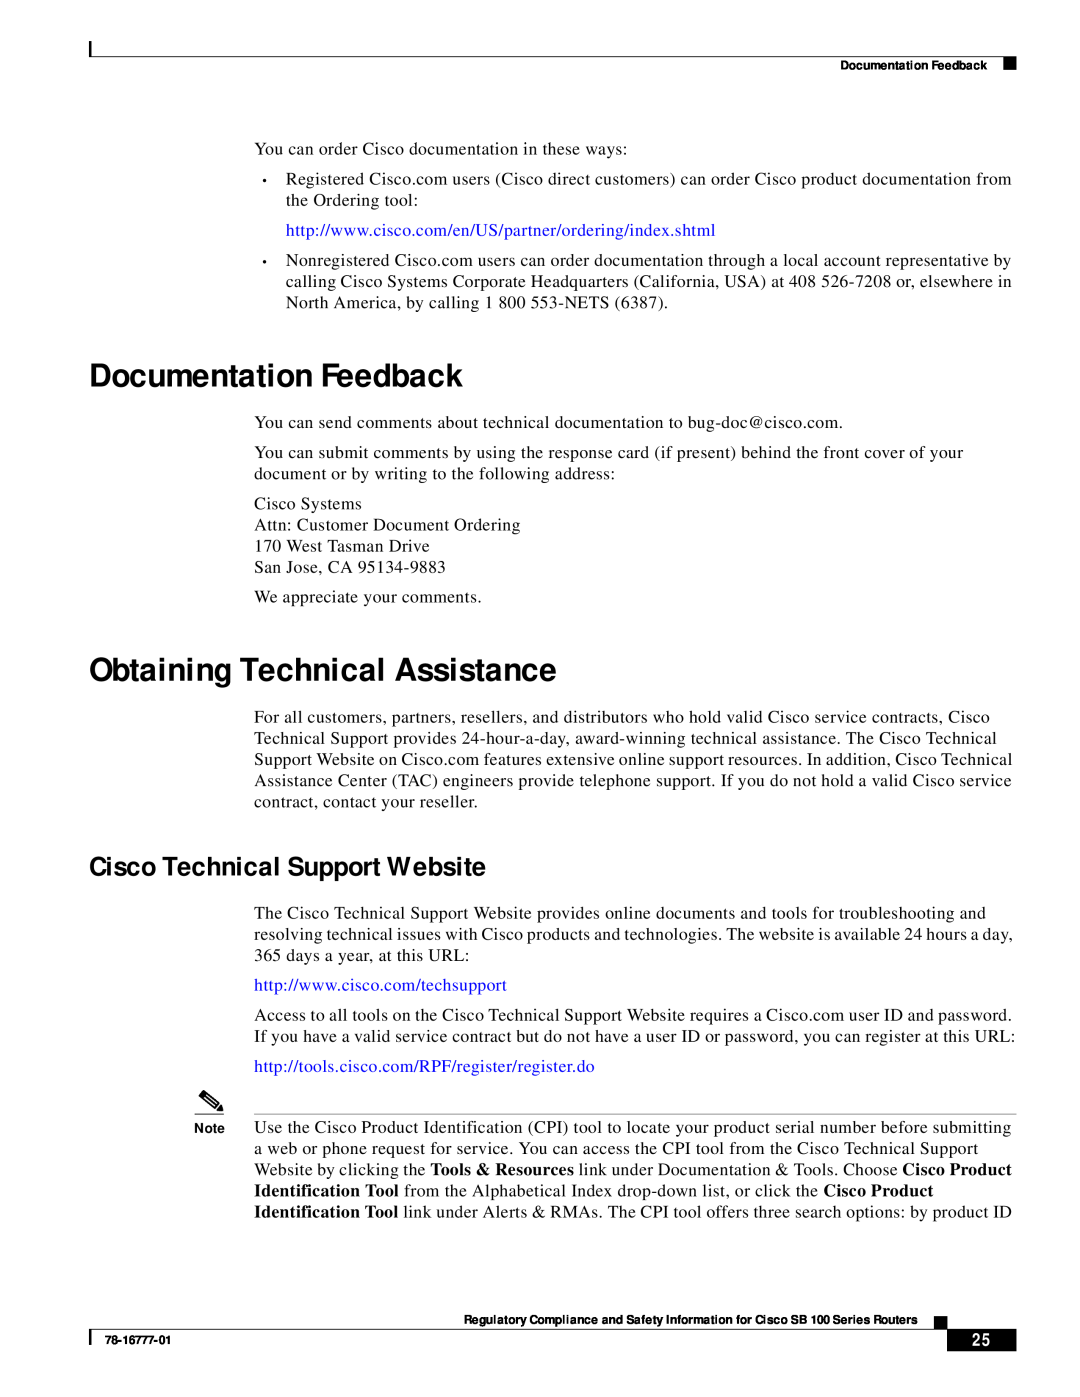 Cisco Systems SB 100 Series manual Documentation Feedback, Obtaining Technical Assistance, Cisco Technical Support Website 